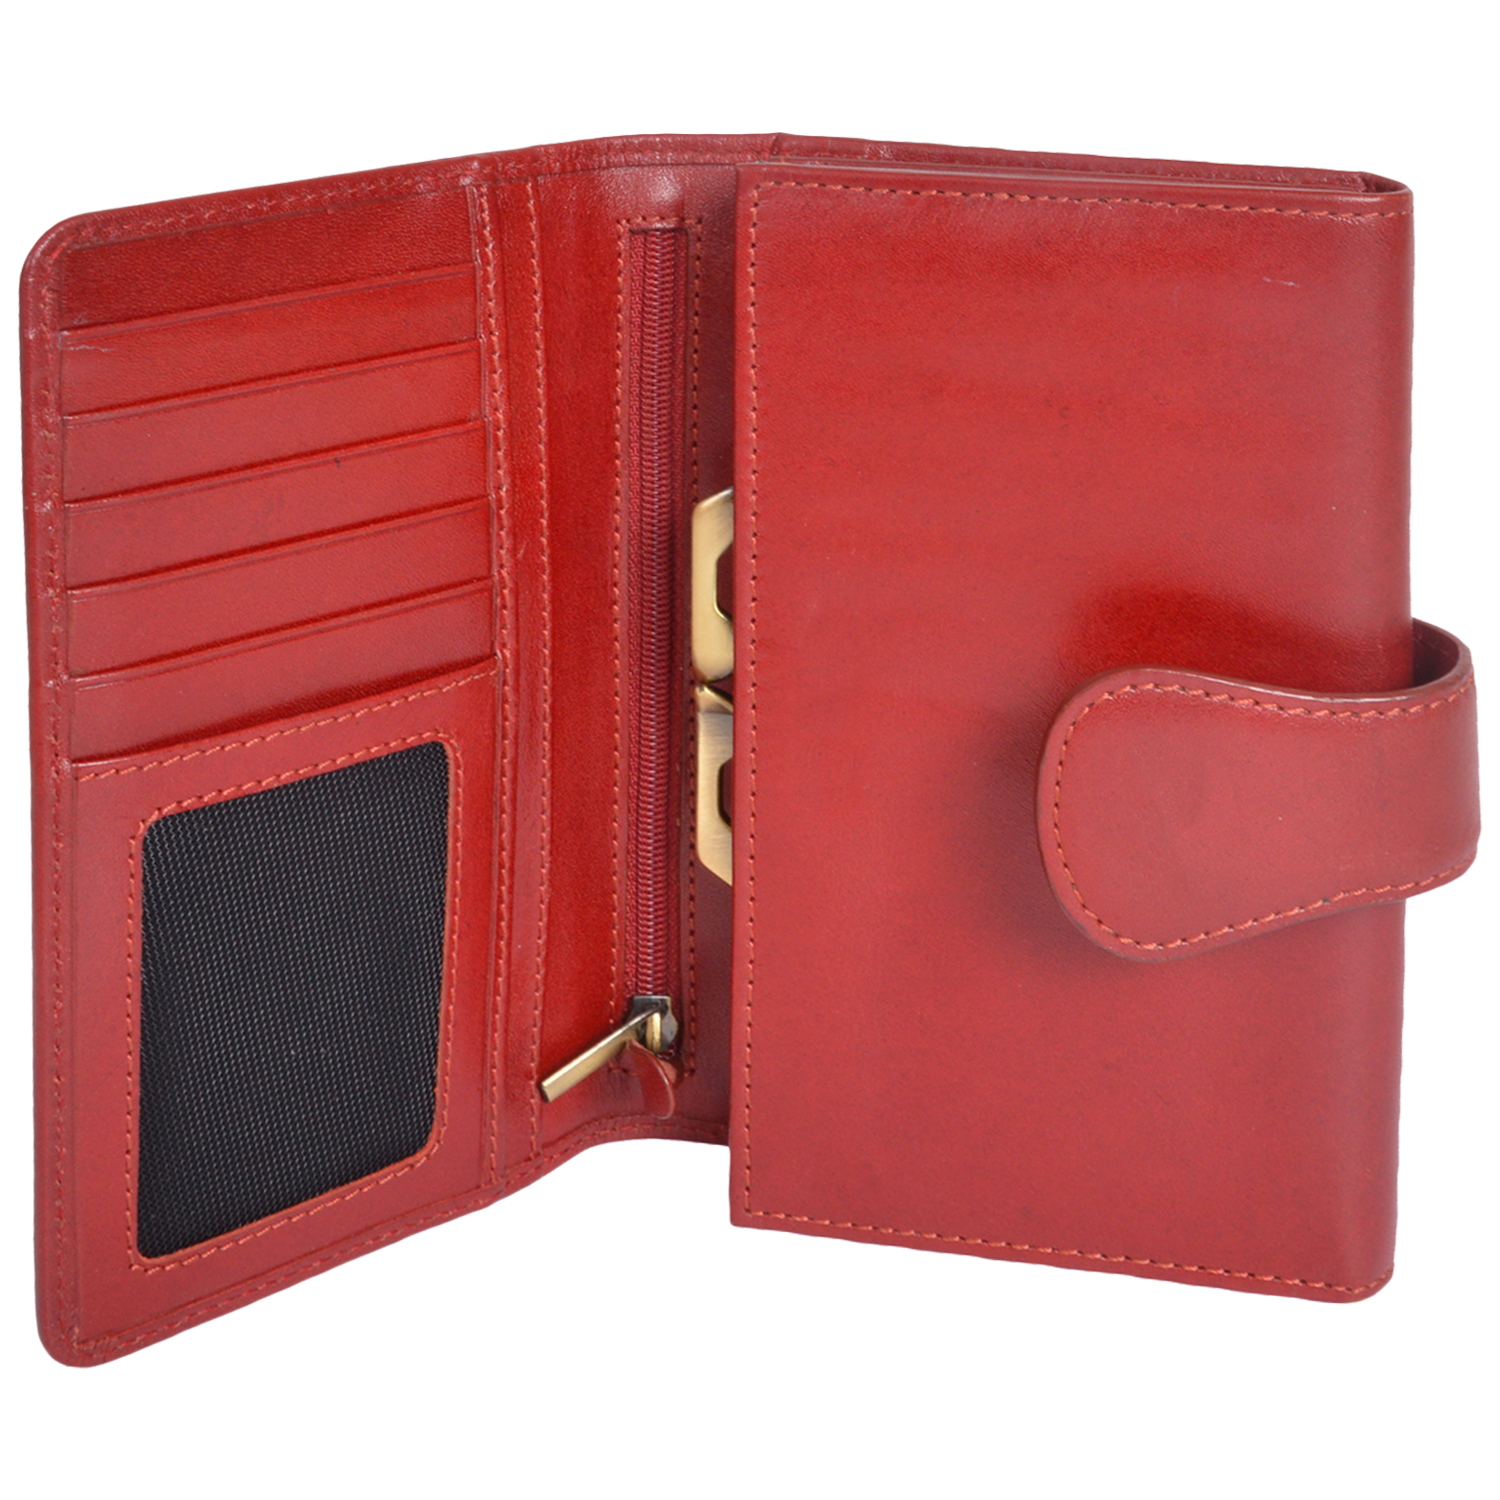 Genuine Leather Girls Red Wallet 5 Card Slots - Leatherman Fashion ...